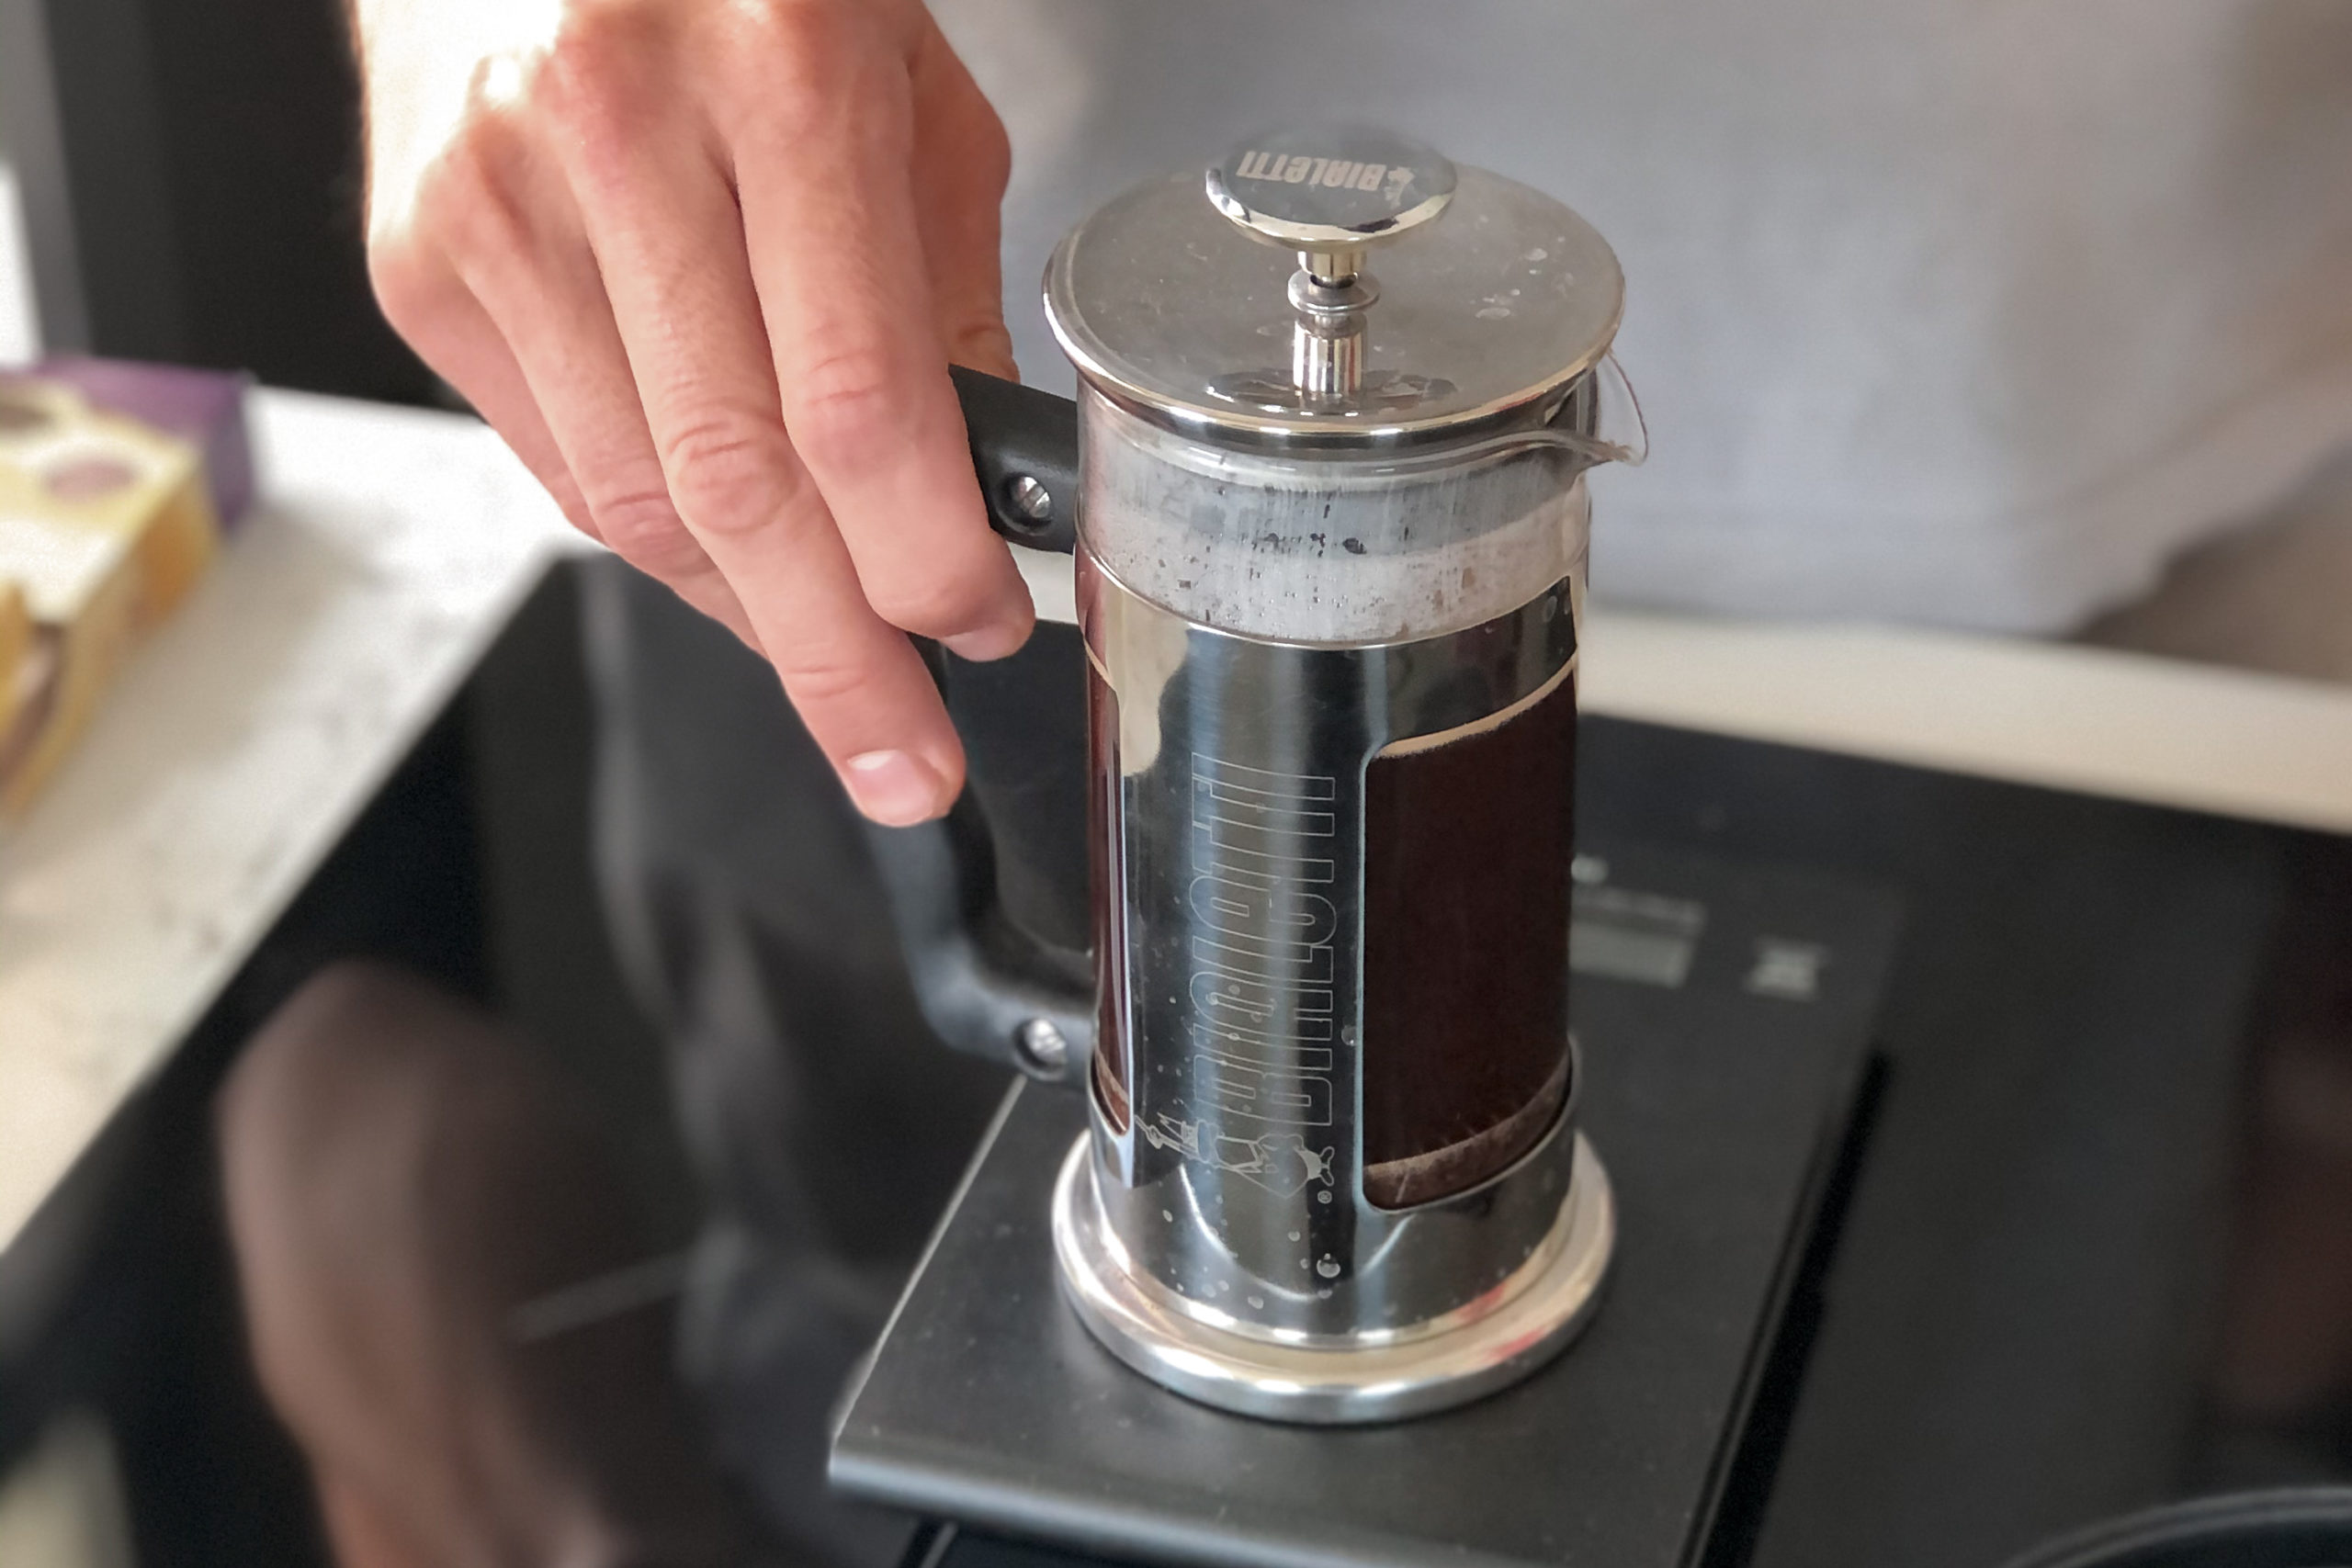 How to make french press coffee